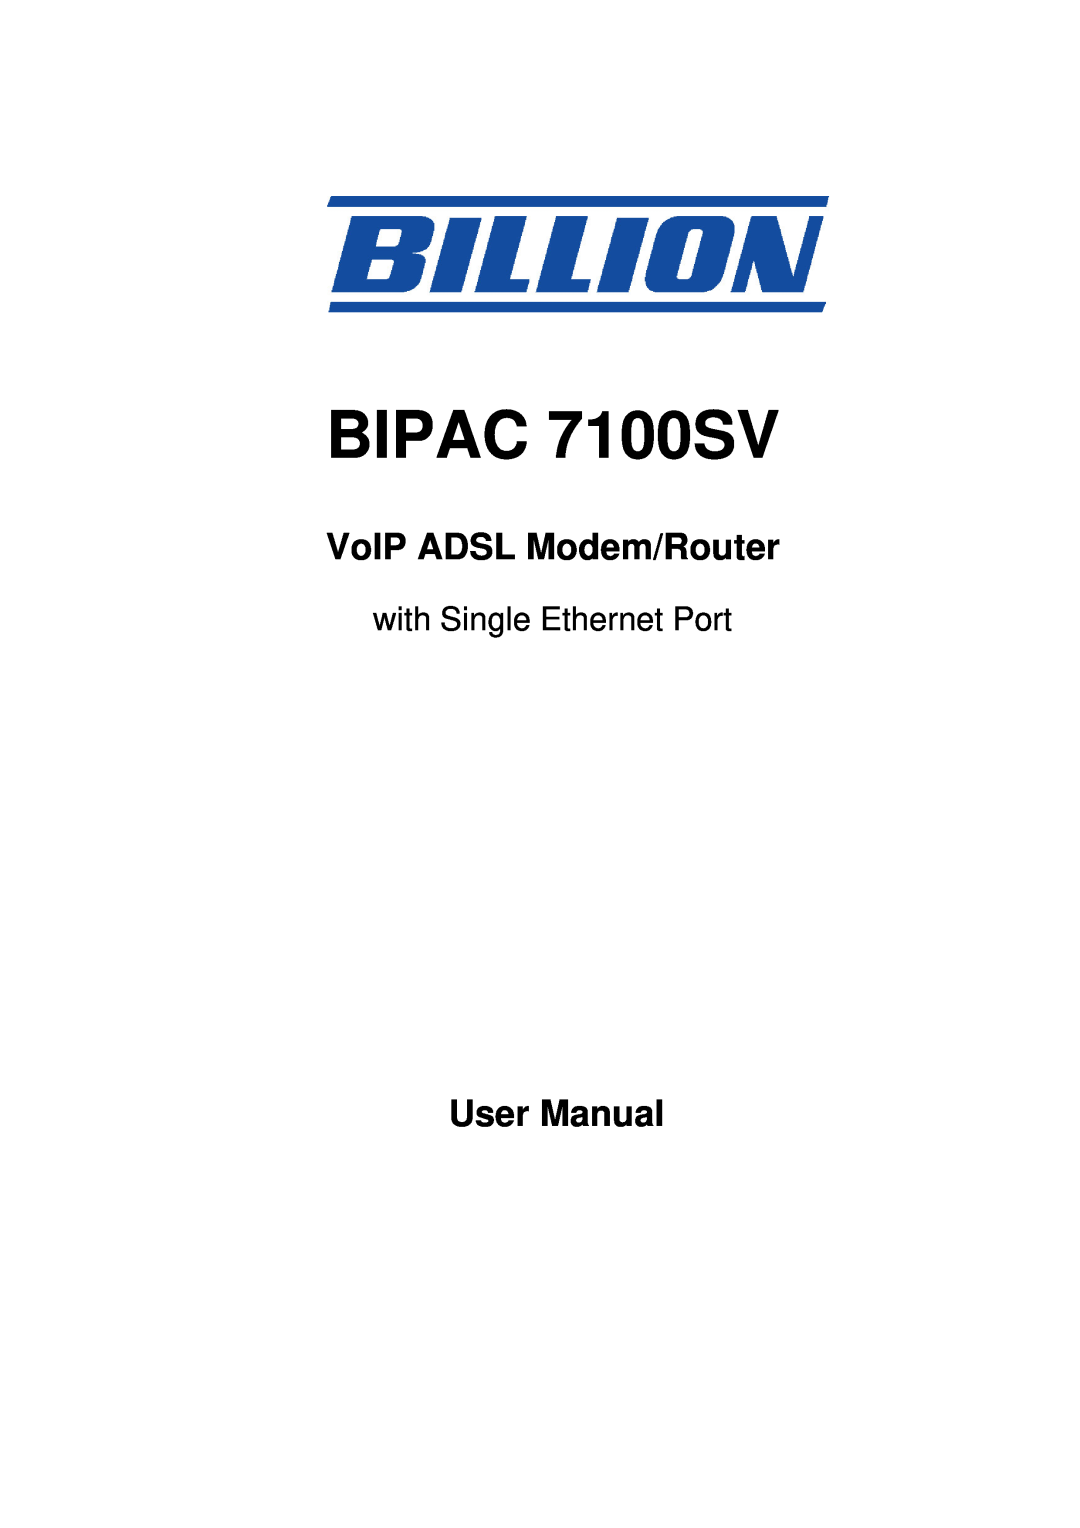 Billion Electric Company manual VoIP ADSL Modem/Router, User Manual, BIPAC 7100SV, with Single Ethernet Port 